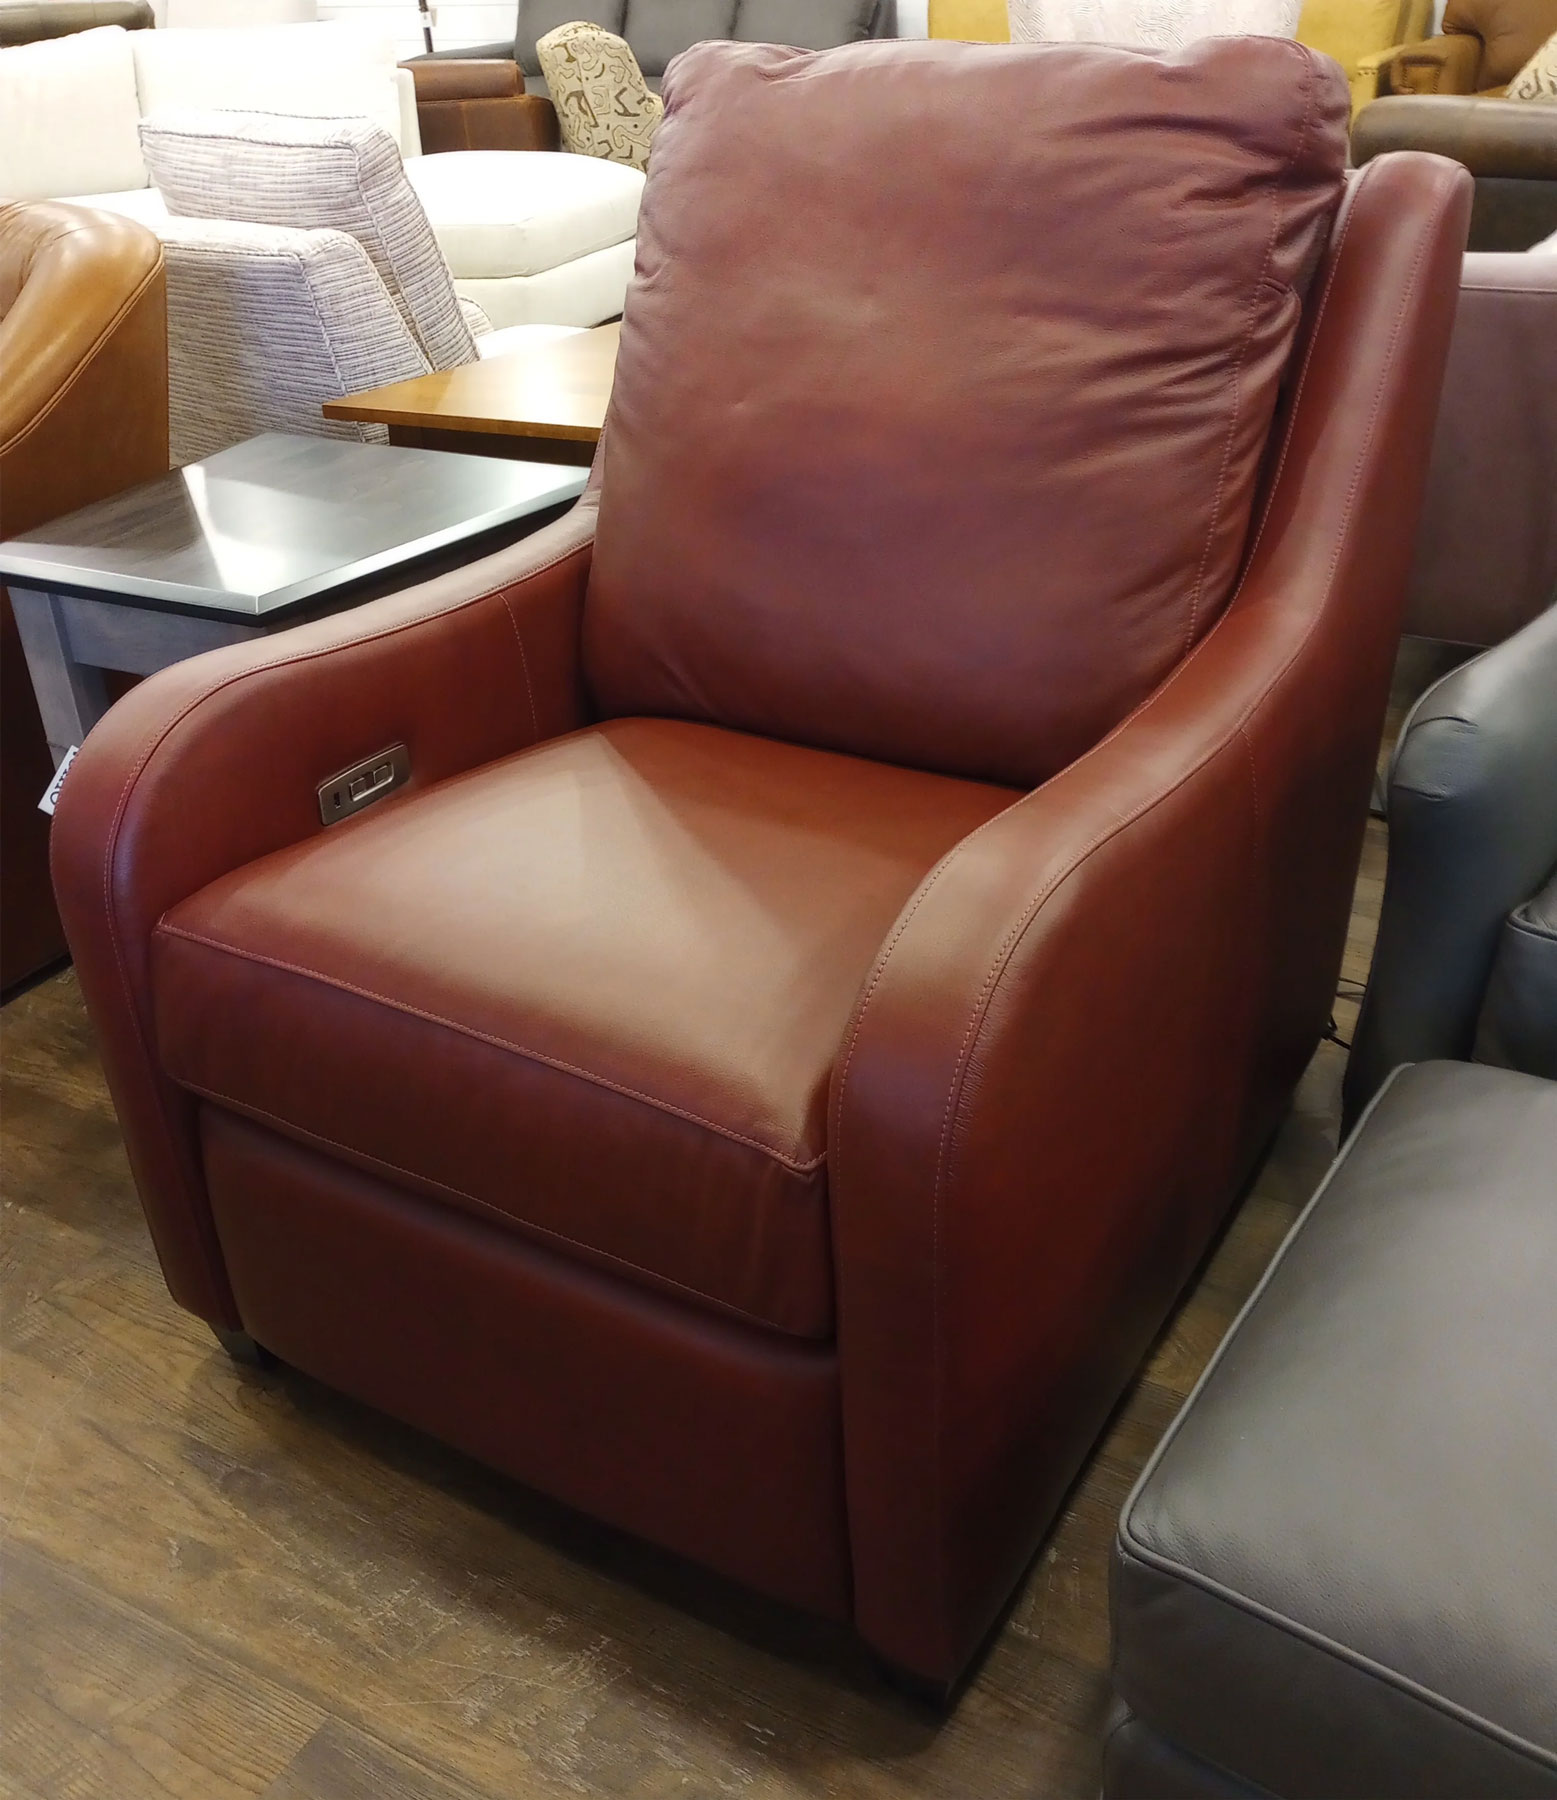 CC Leather 714 Power Recliner in Gaucholin Vermilion Leather